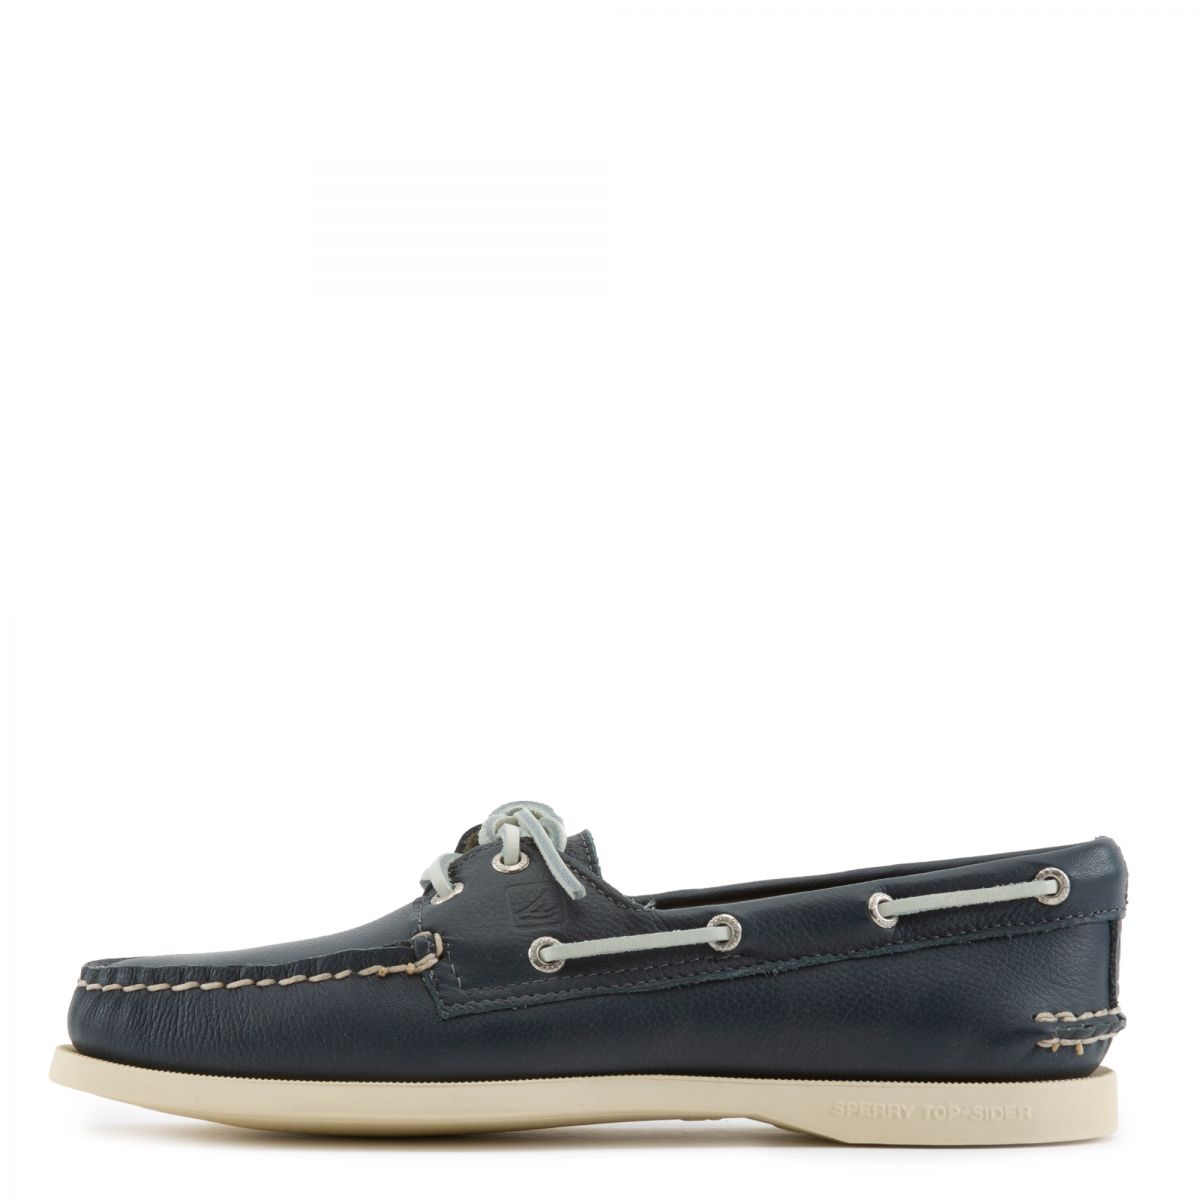 SPERRY TOP-SIDER A/O NAVY 9294497 - PLNDR